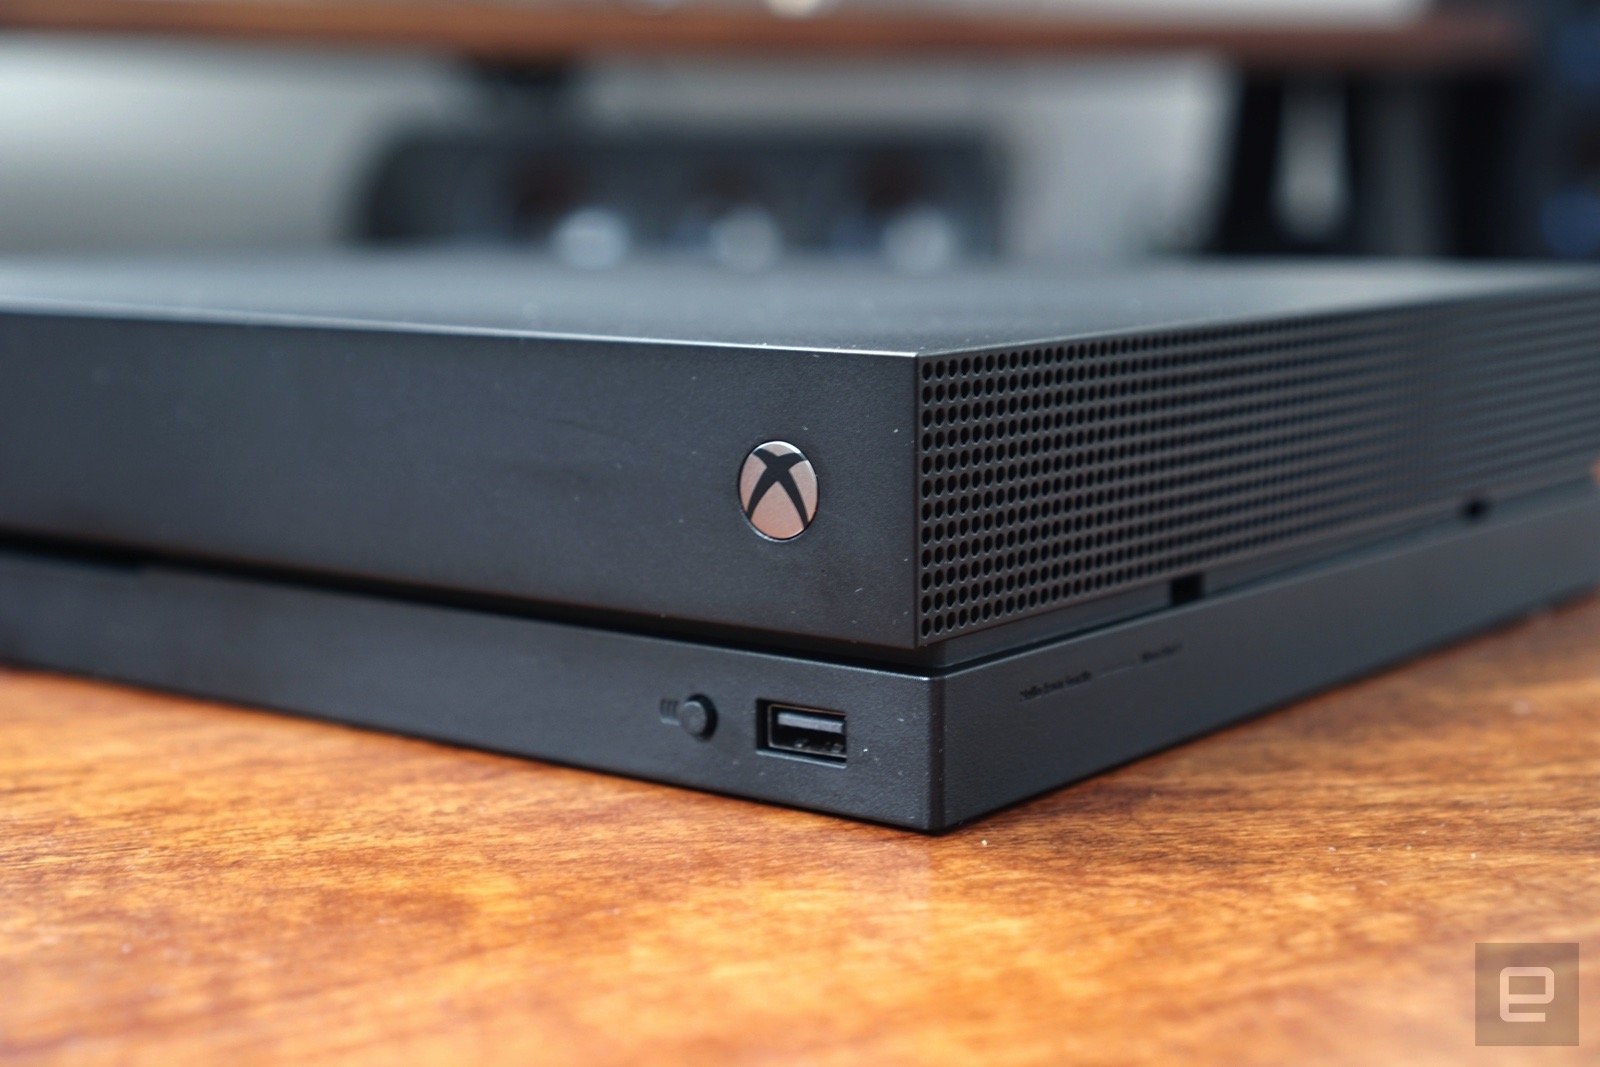 Xbox One X review: A console that keeps up with gaming PCs | DeviceDaily.com